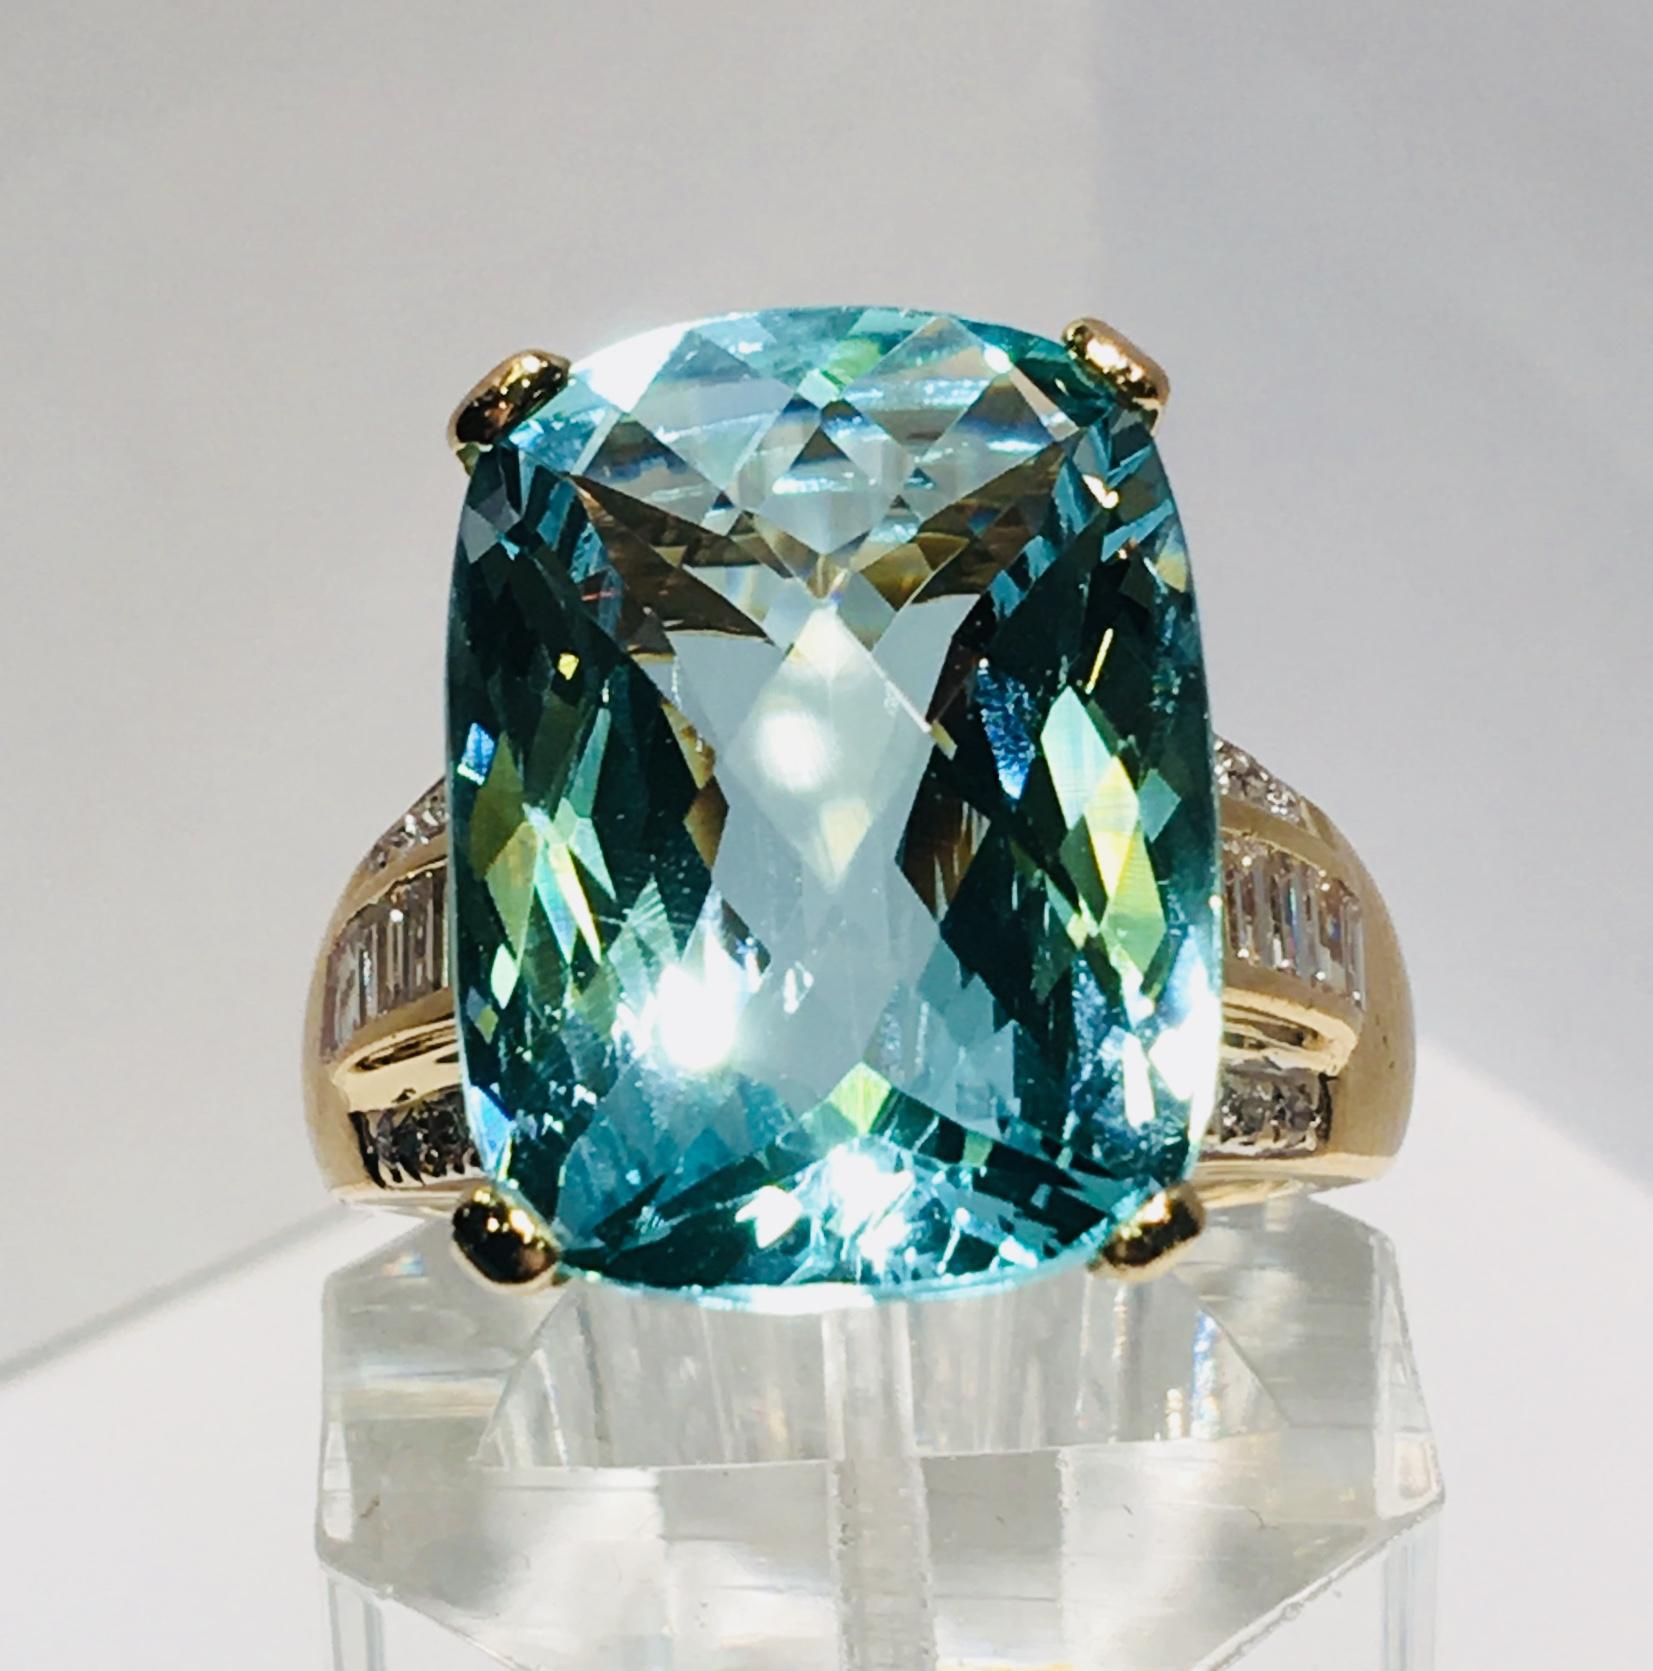 Magnificent 14 karat yellow gold estate ring features a prong-set, checkerboard cut, rectangular aquamarine, which is flanked by a row of channel-set baguette diamonds between two rows of round brilliant, pave set diamonds.

Aquamarine measures